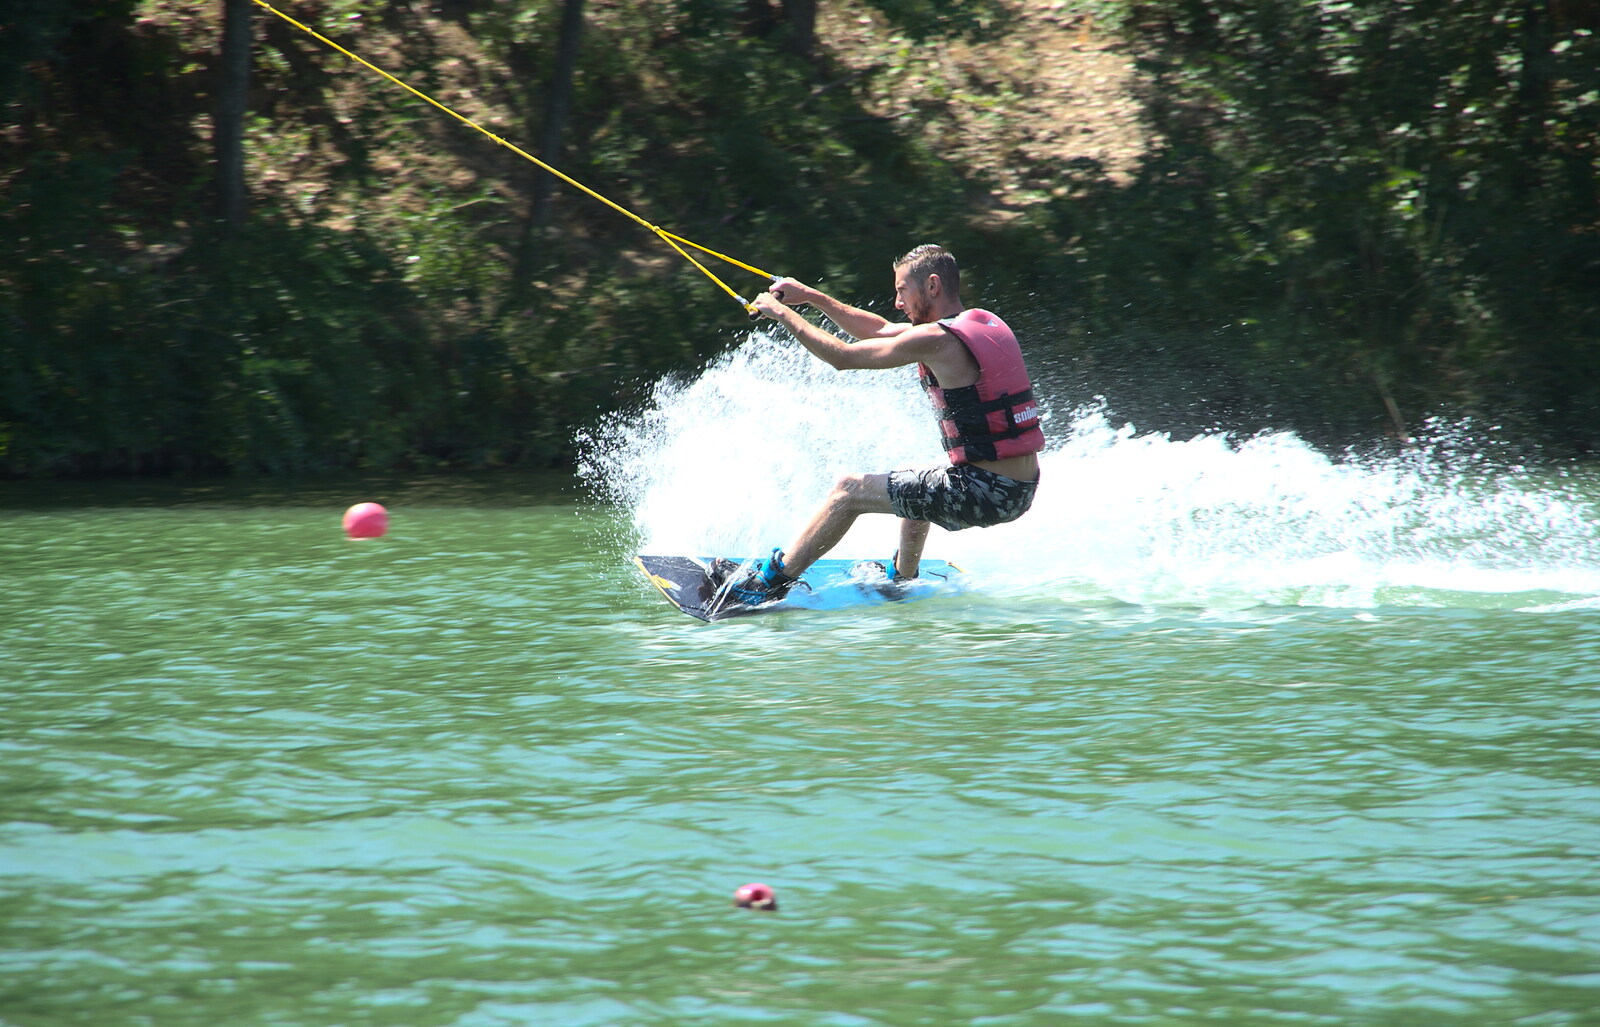 Some dude practices water-skiing from Abbaye Sainte-Marie de Lagrasse and The Lac de la Cavayère, Aude, France - 10th August